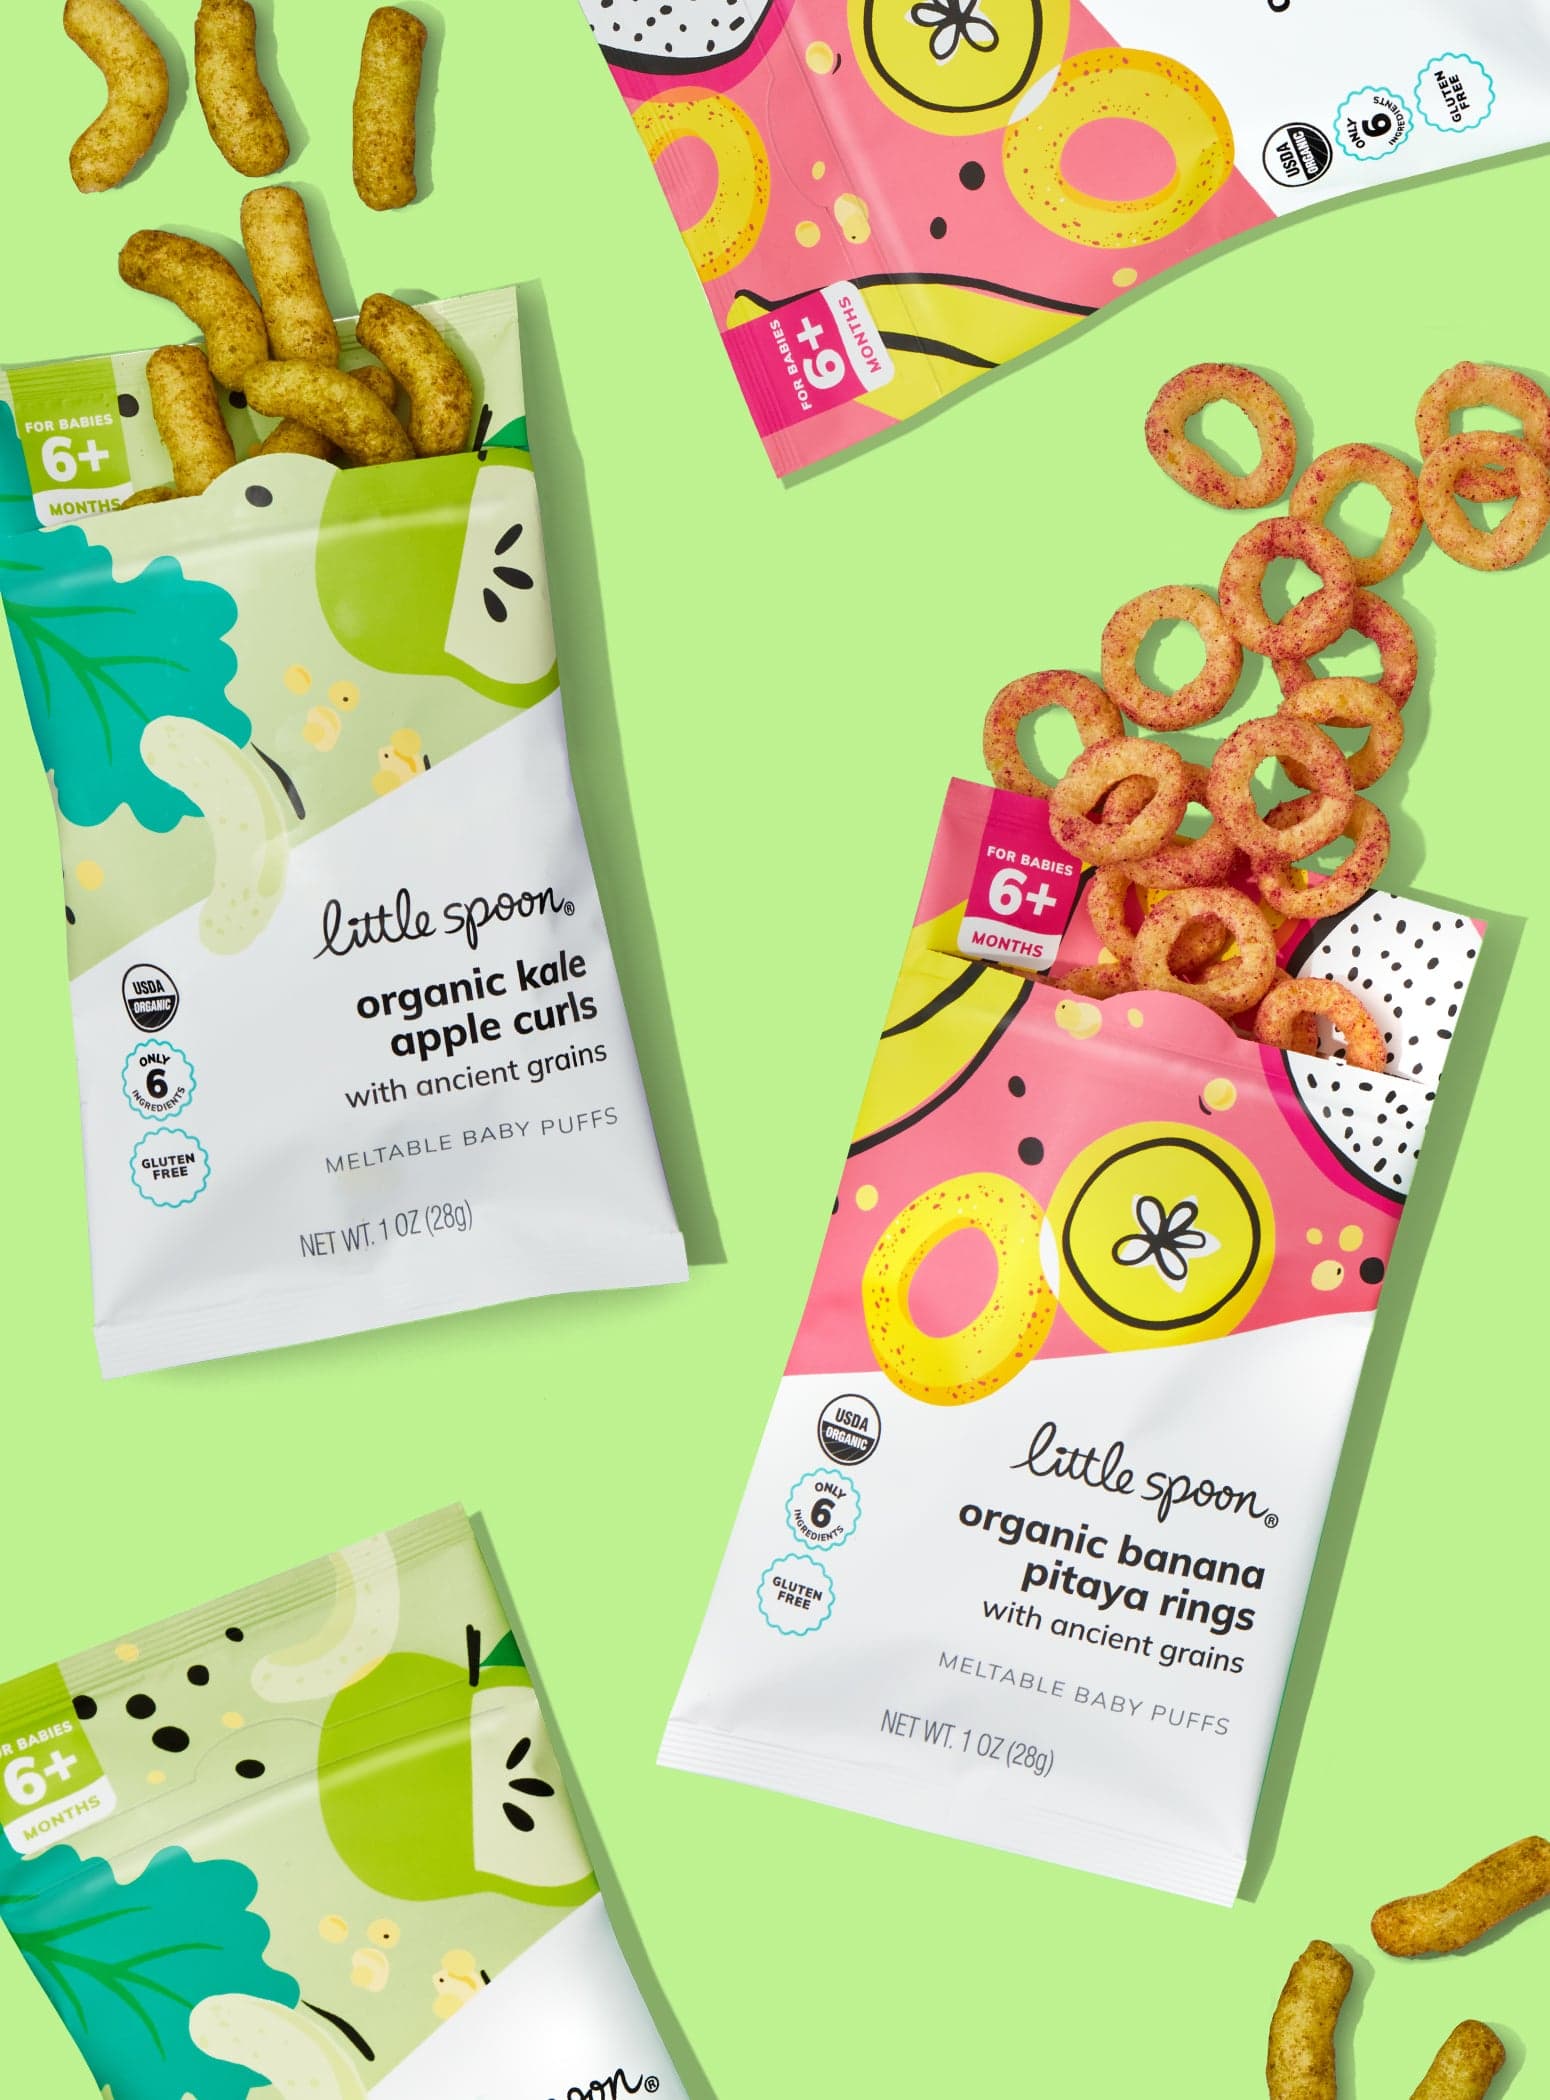 Opened bags of organic banana pitaya rings and organic kale apple curls puffs flavors and two closed bags organic banana pitaya rings and organic kale apple curls on a lime green background.